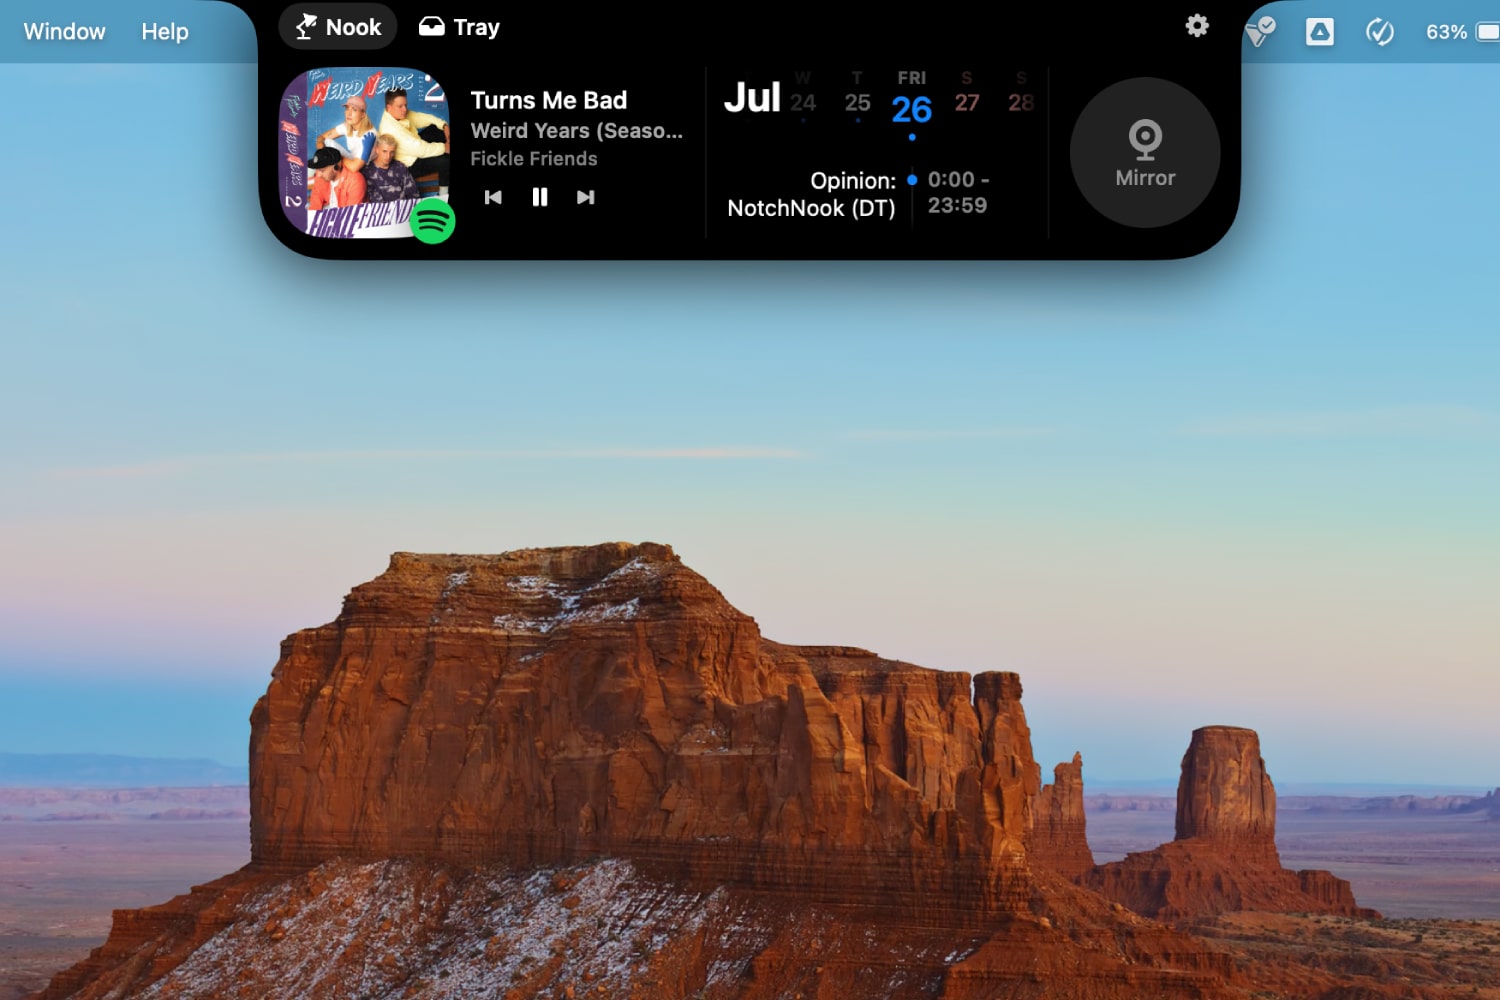 NotchNook running in macOS, with the nook expanded to show Spotify controls and a calendar.